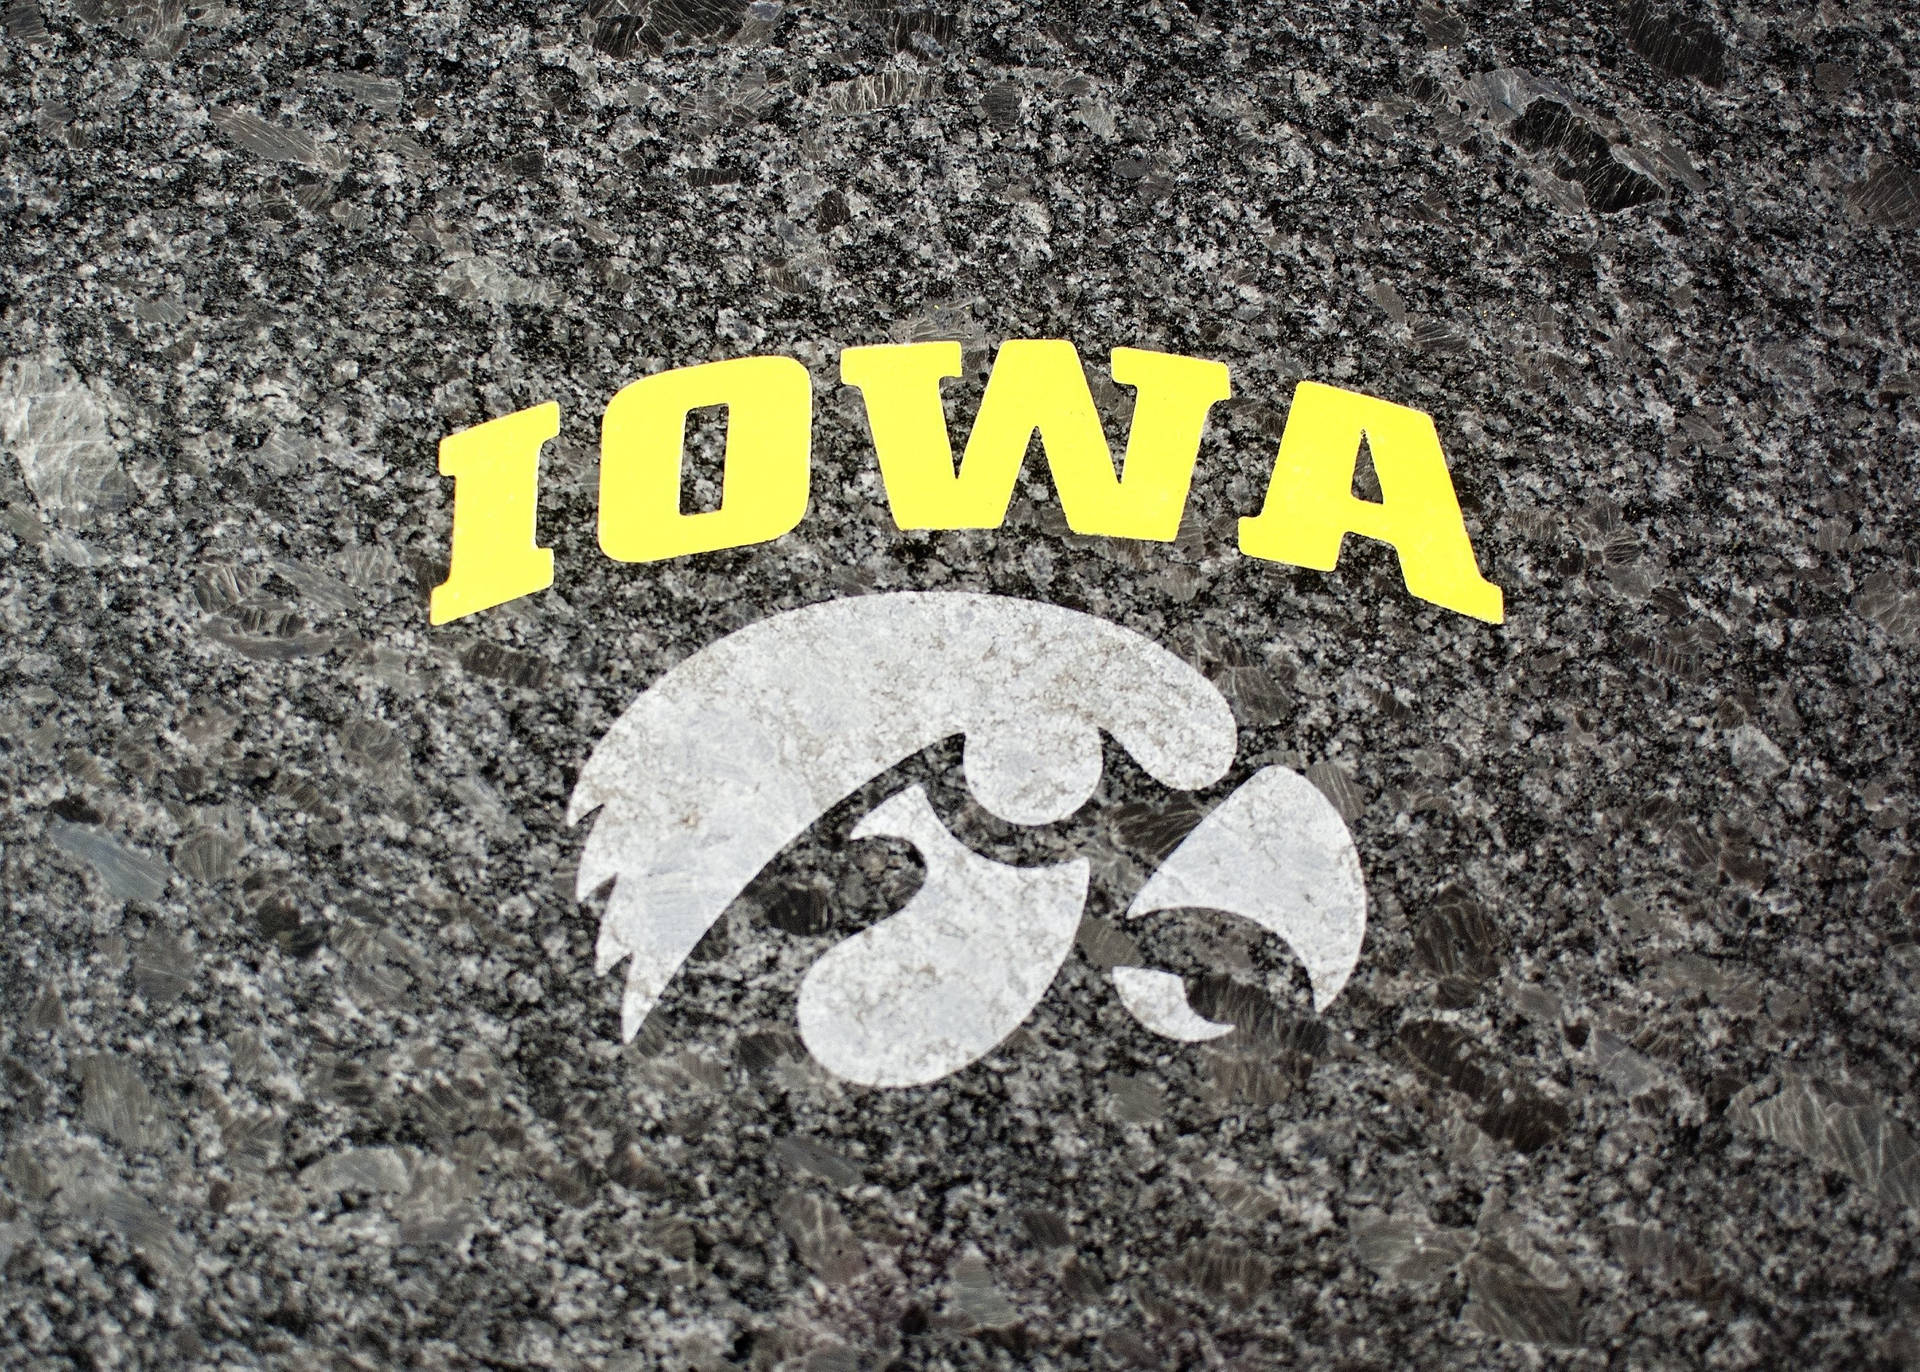 The Irresistible Strength Of The Iowa Hawkeyes Captured In A Striking Image.